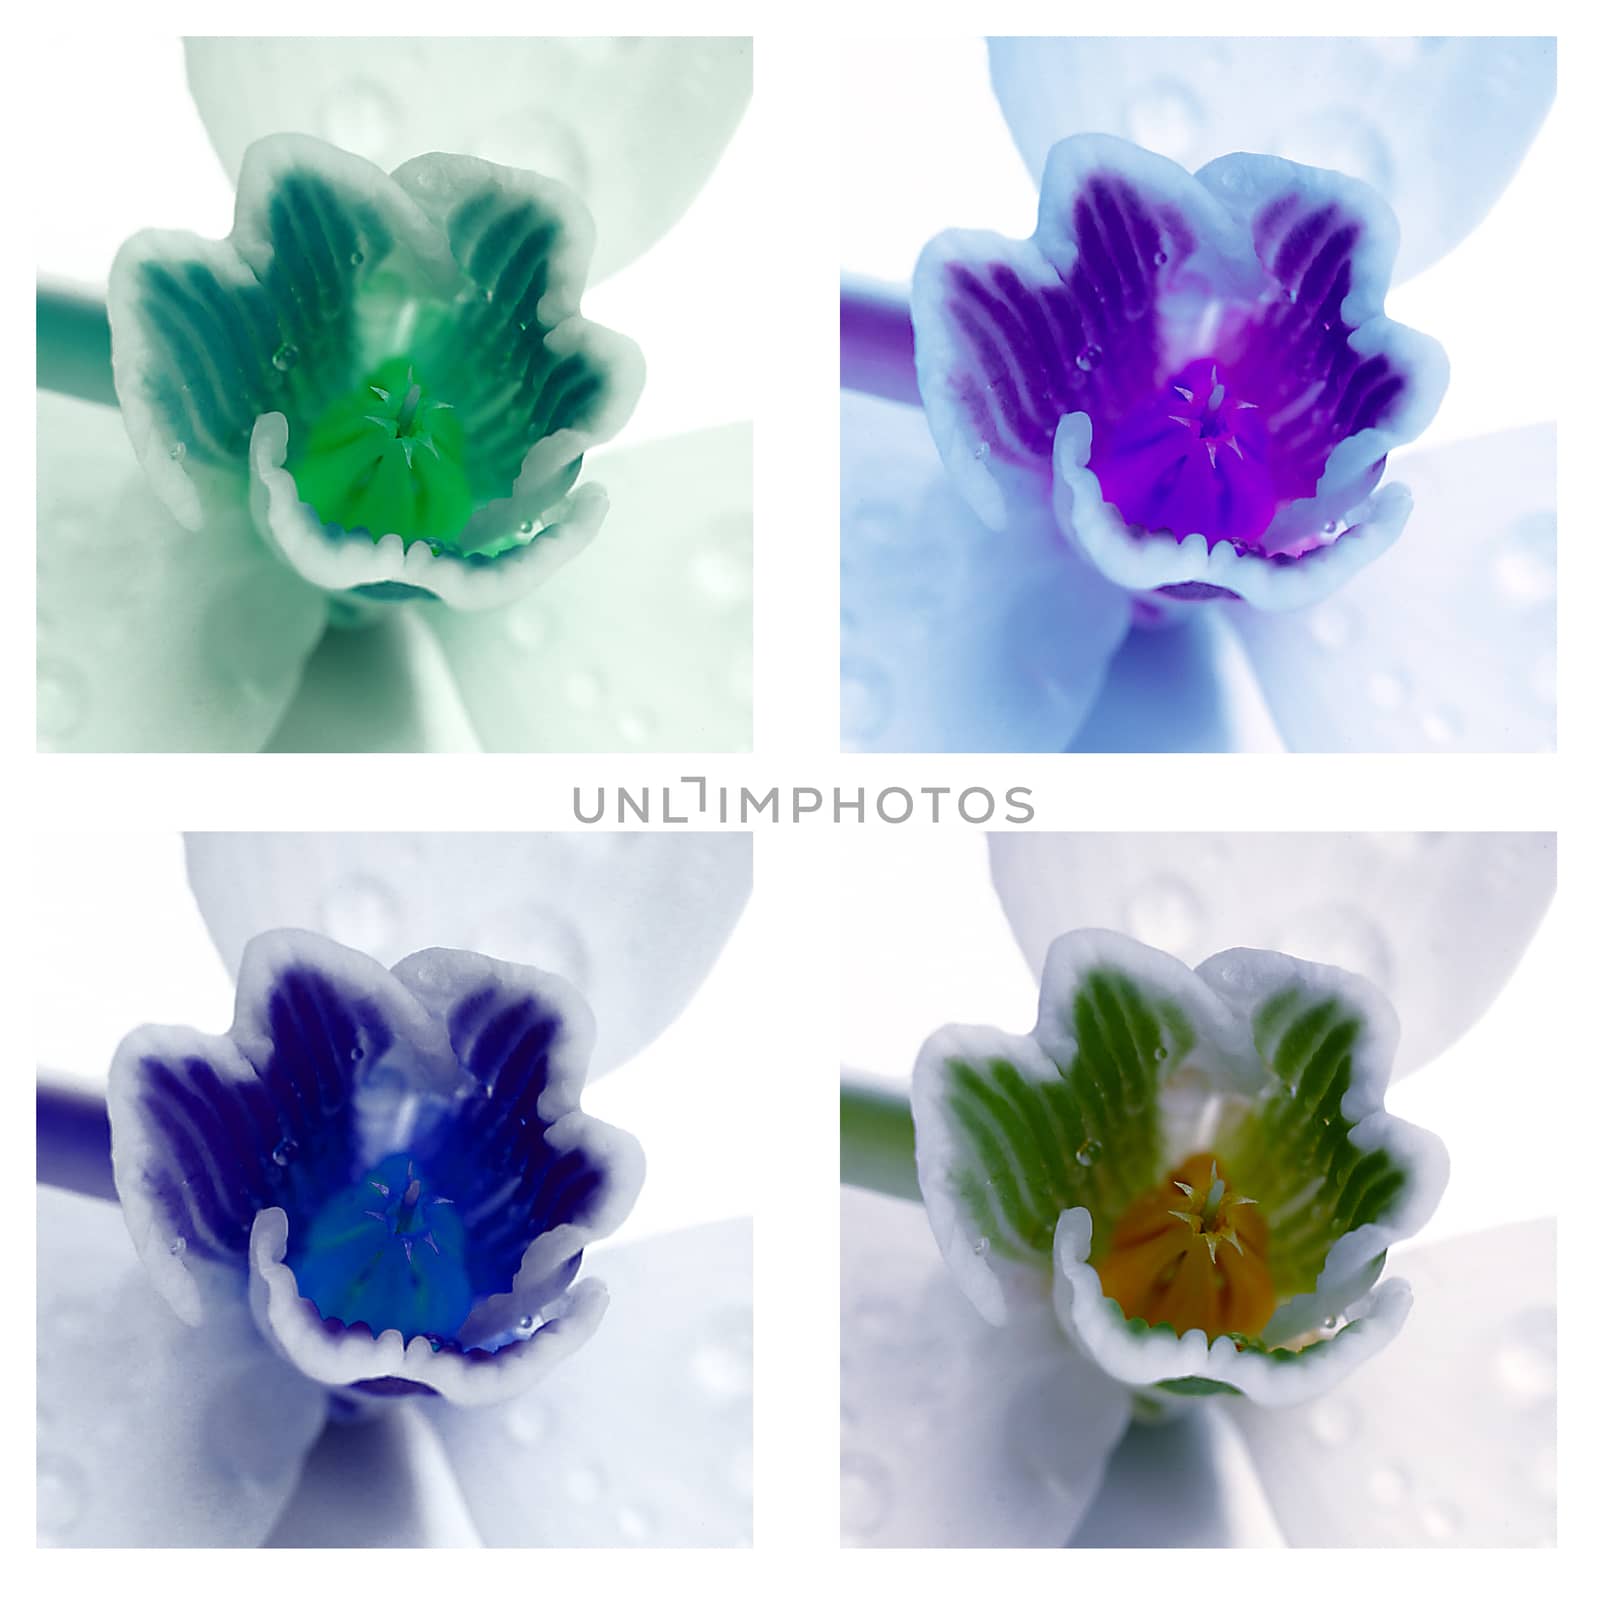 colorful collage of snowdrop flowers, close-up